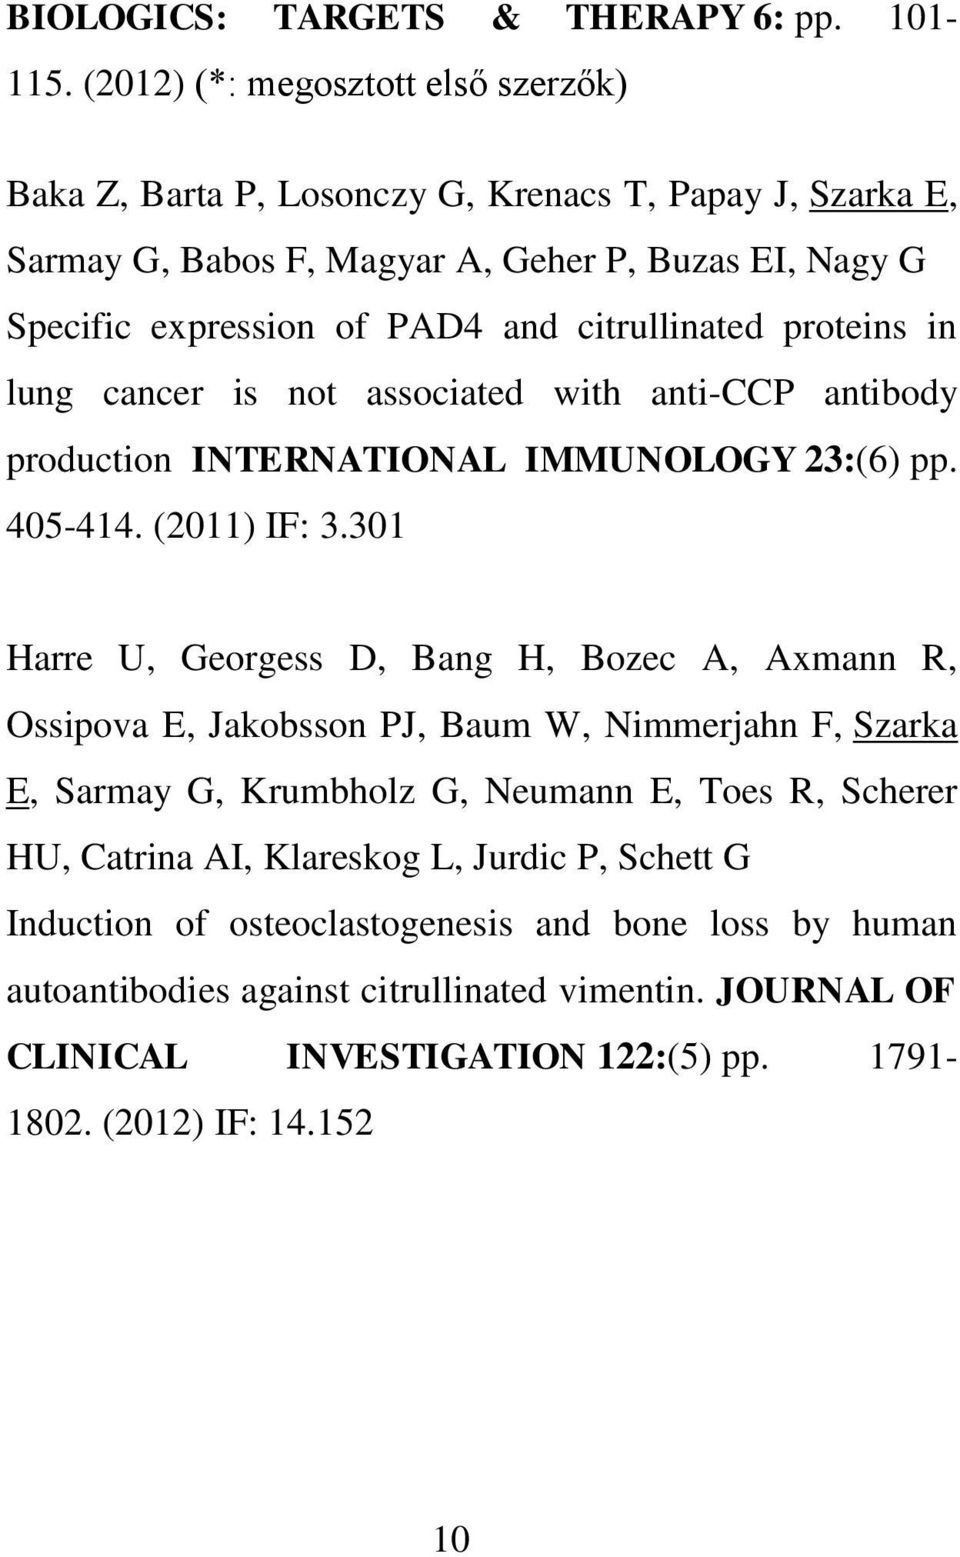 citrullinated proteins in lung cancer is not associated with anti-ccp antibody production INTERNATIONAL IMMUNOLOGY 23:(6) pp. 405-414. (2011) IF: 3.